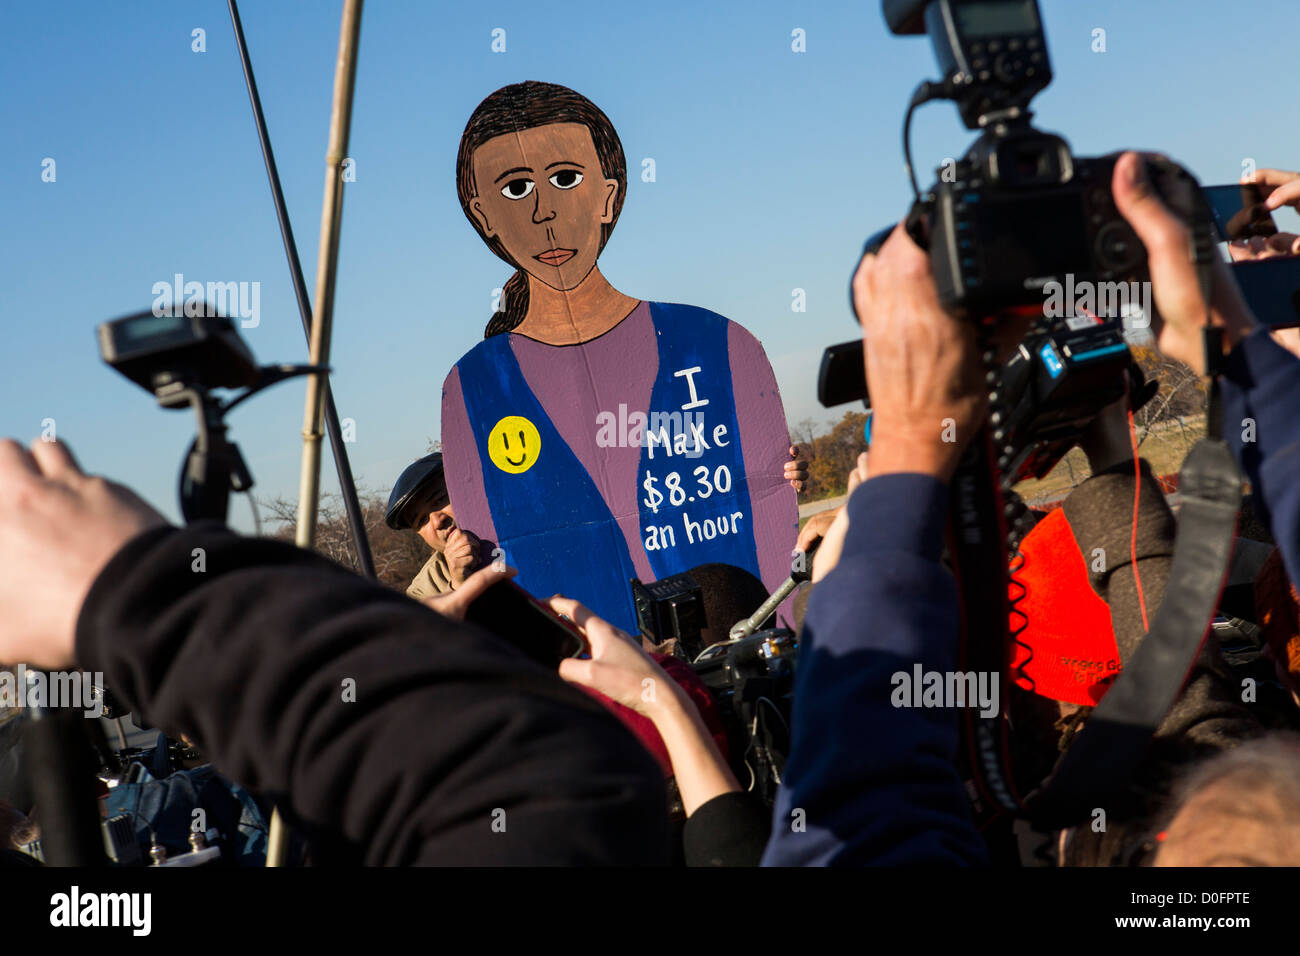 Demonstrators protest against working conditions at Walmart.  Stock Photo